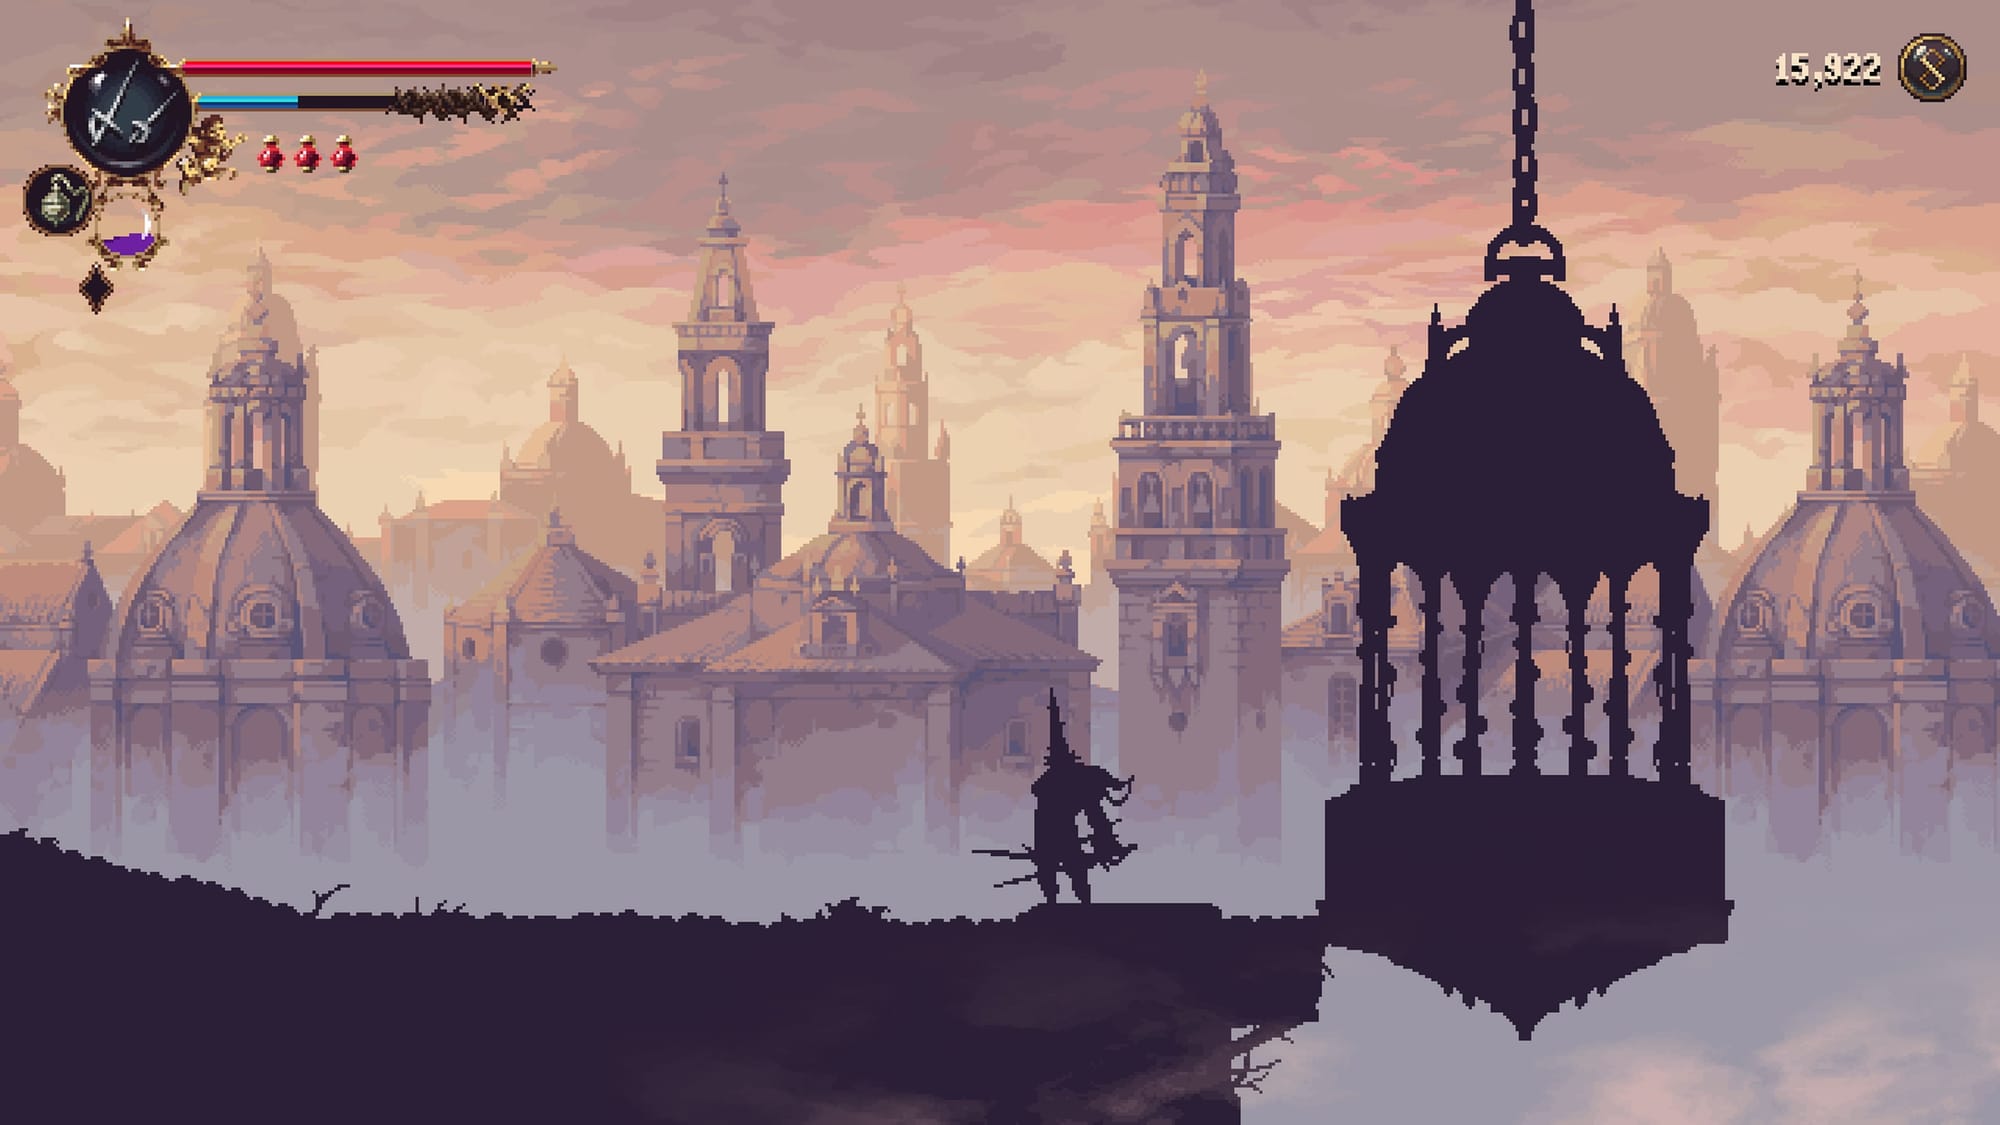 A screenshot of a a rooftop passage with a landscape with cathedrals and towers of victorian era and forefront with the main character being completely darkened.